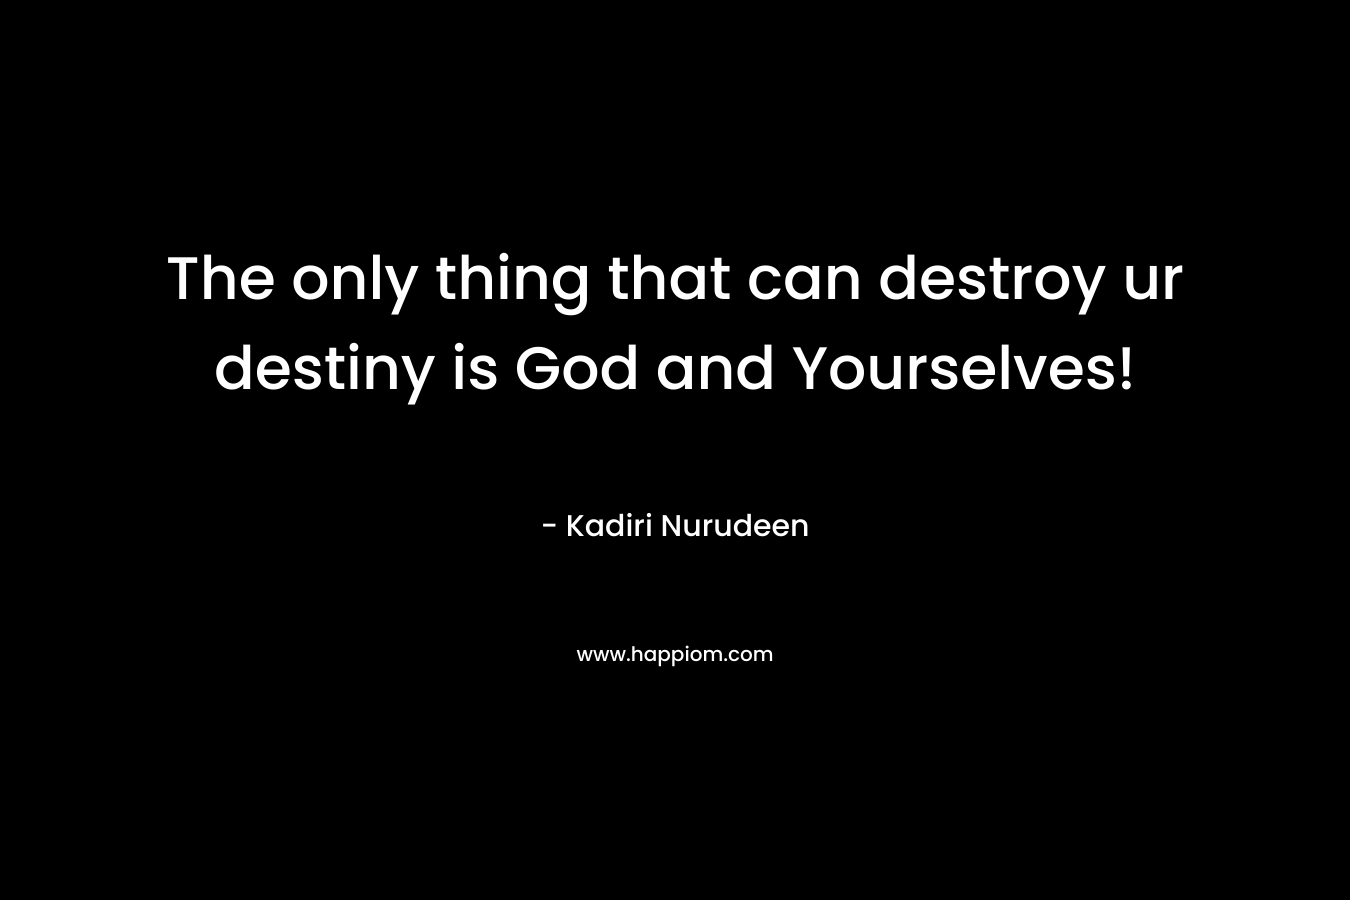 The only thing that can destroy ur destiny is God and Yourselves!